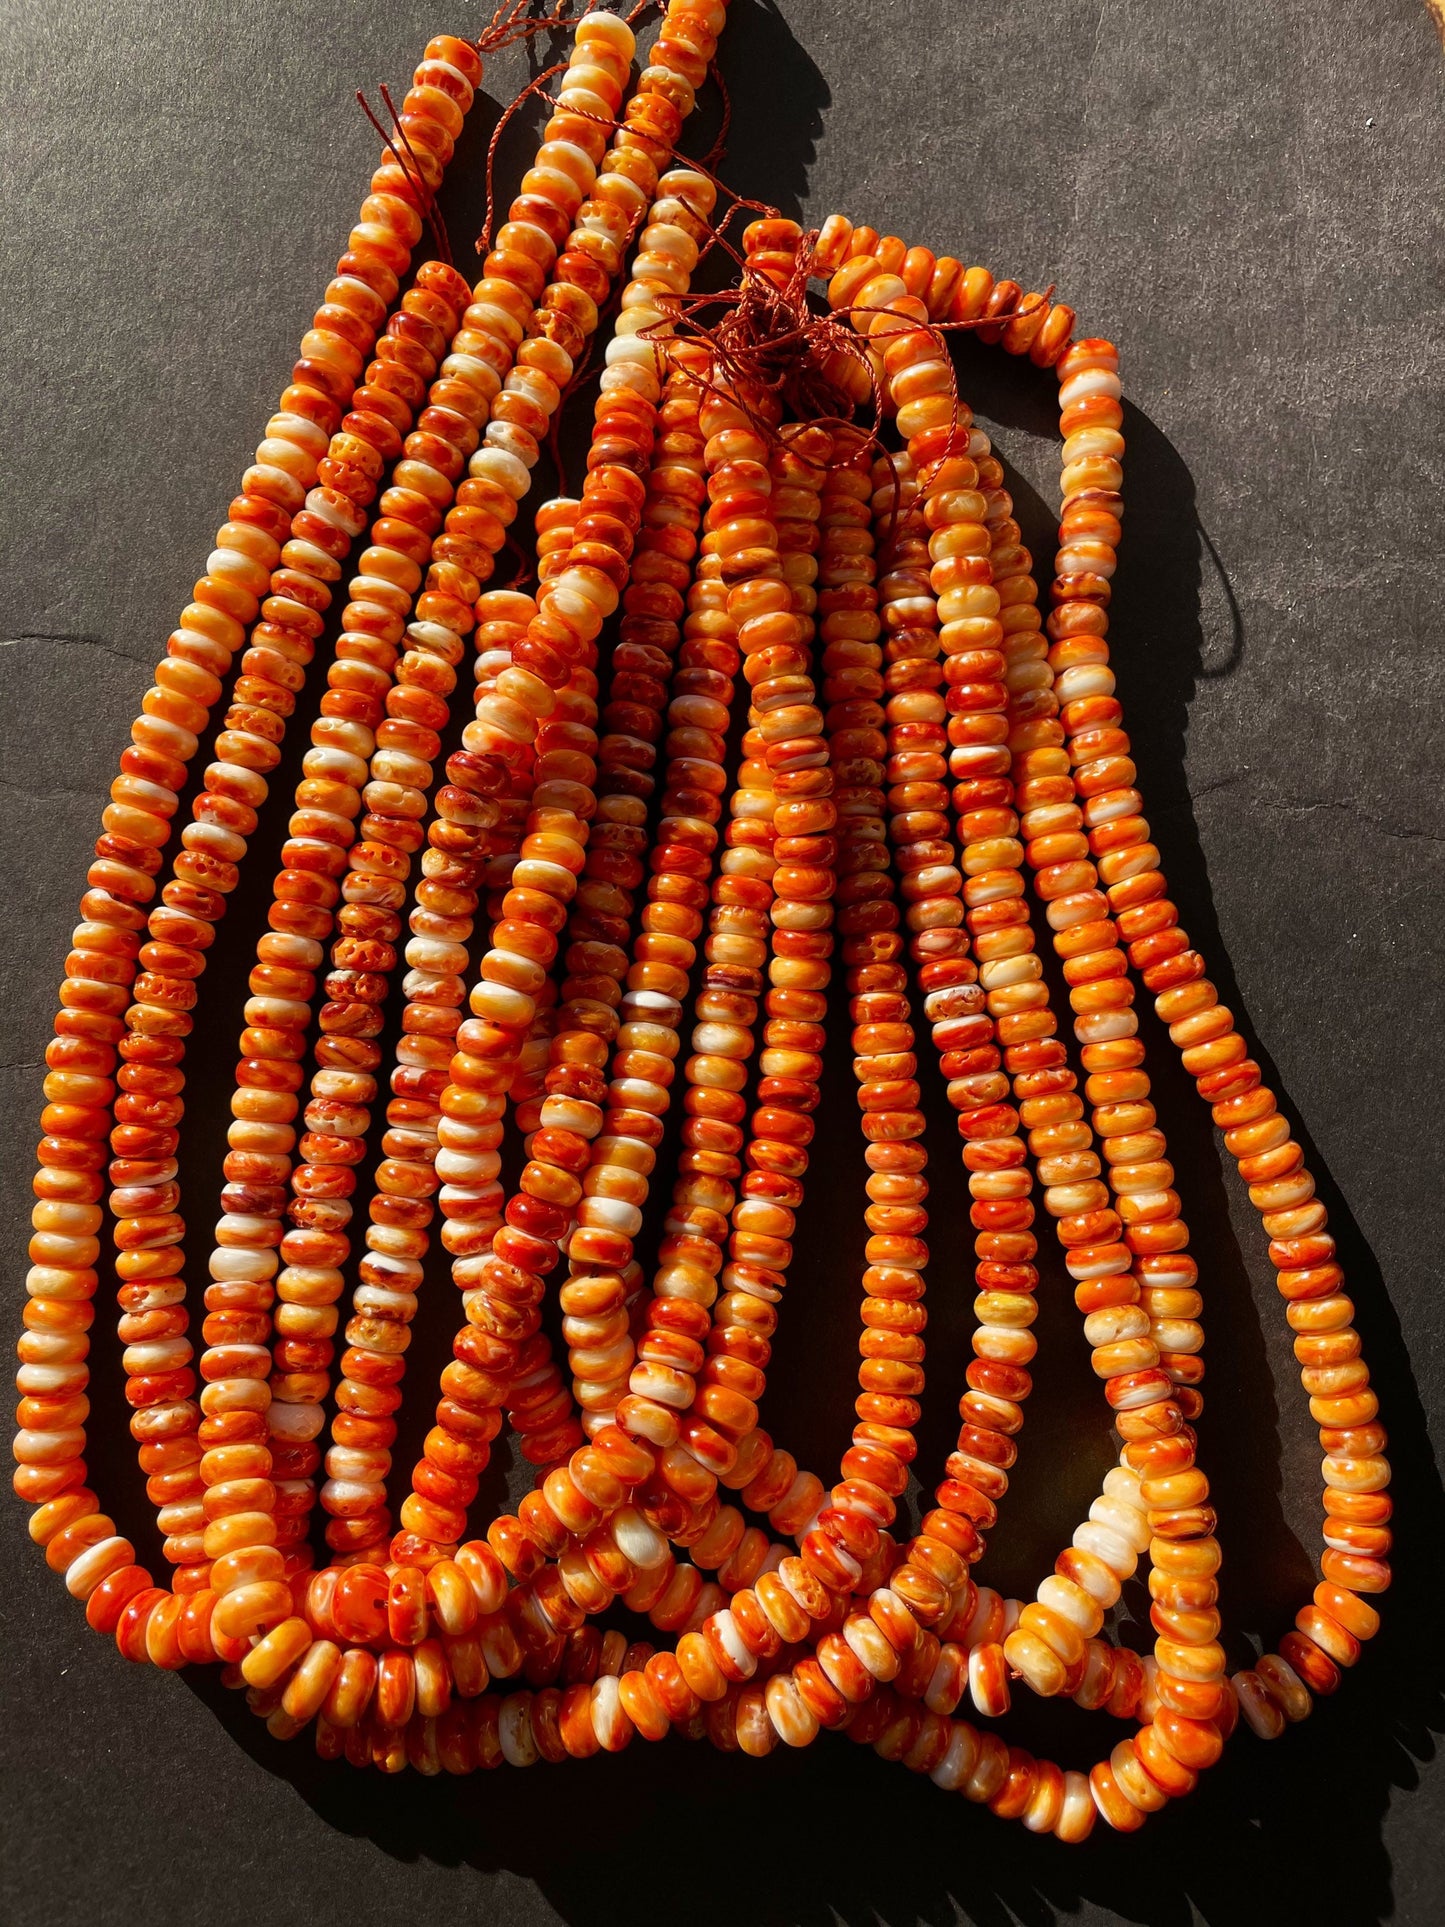 AAA Natural Spiny Oyster Shell Bead 5x8mm Rondelle Shape, Beautiful Natural Orange Yellow Color Spiny Oyster Shells, Full Strand 15.5"